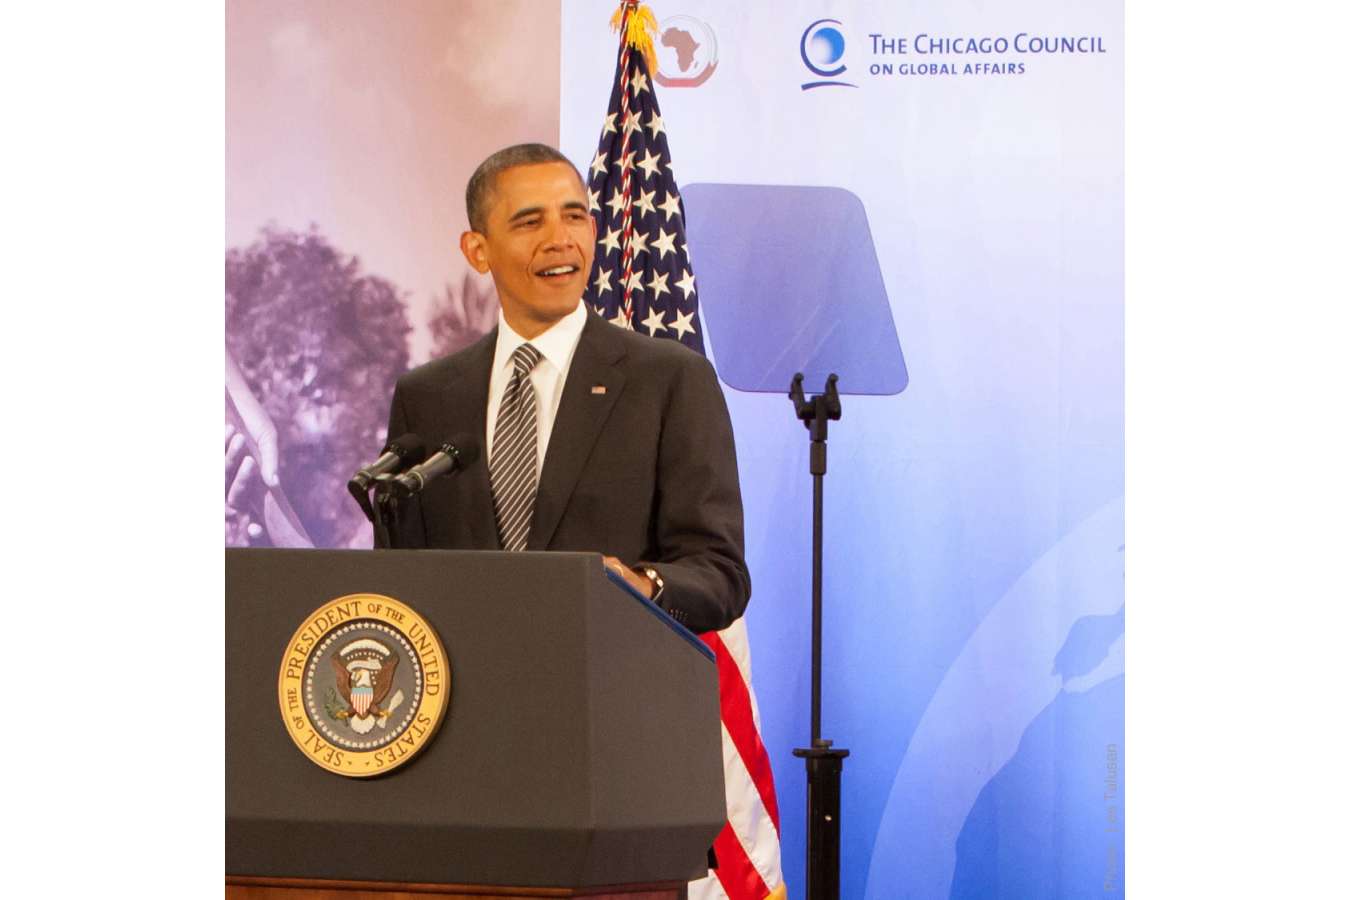 ccg8_3a_obama_square : President Obama's Keynote Leading into the 2012 G8 Summit